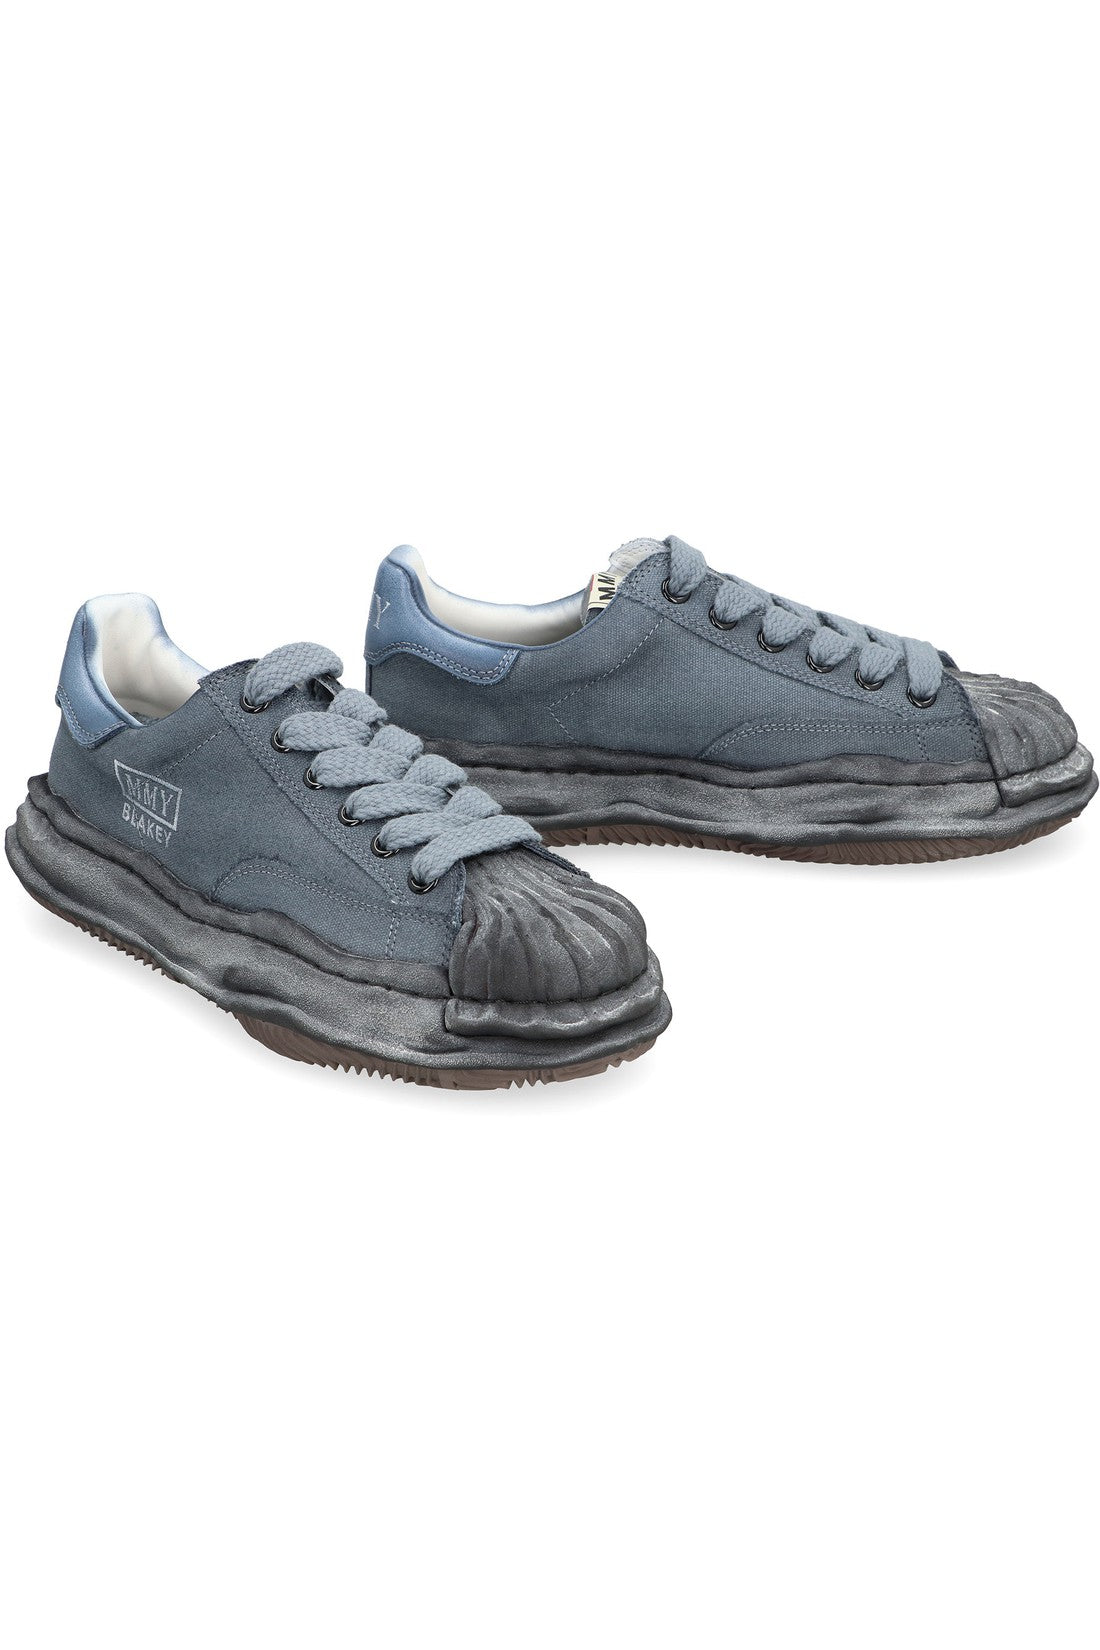 Maison Mihara Yasuhiro-OUTLET-SALE-Blakey Fabric low-top sneakers-ARCHIVIST